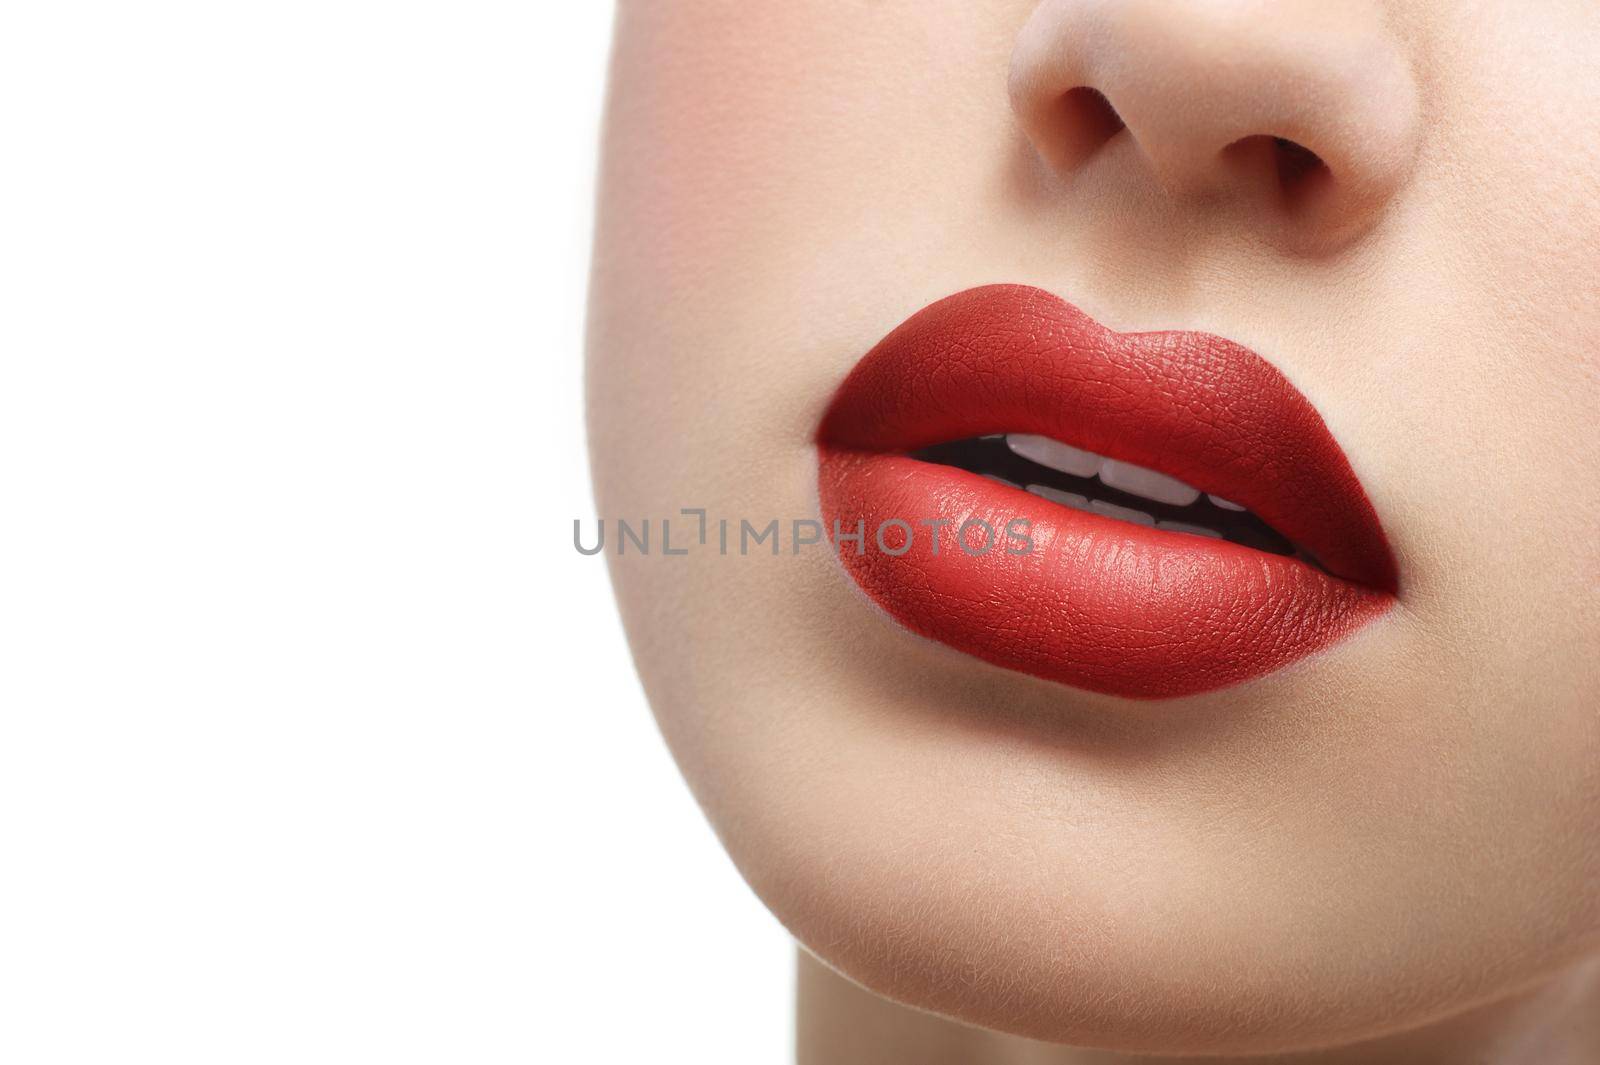 Cropped close up of full sexy sensual lips of a beautiful woman. Red lipstick on sexy plump lips isolated on white copyspace makeup visage sexuality femininity beauty face cosmetics fashion concept